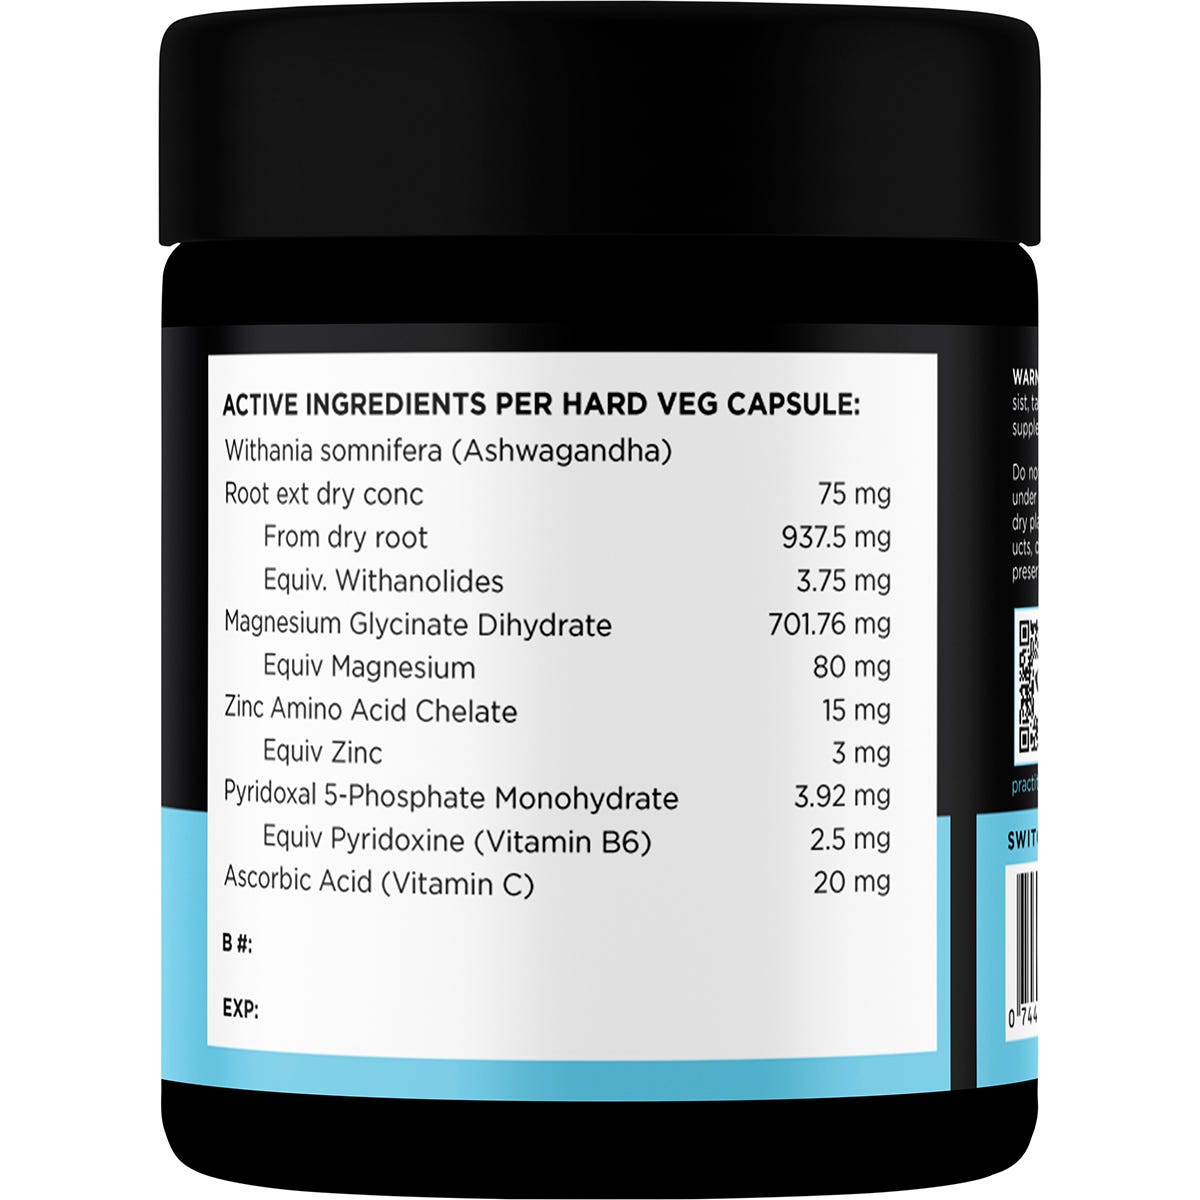 Switch Nutrition Adrenal Magnesium Support Formula Capsules 120 Caps - Dr Earth - Magnesium & Salts, Nutrition